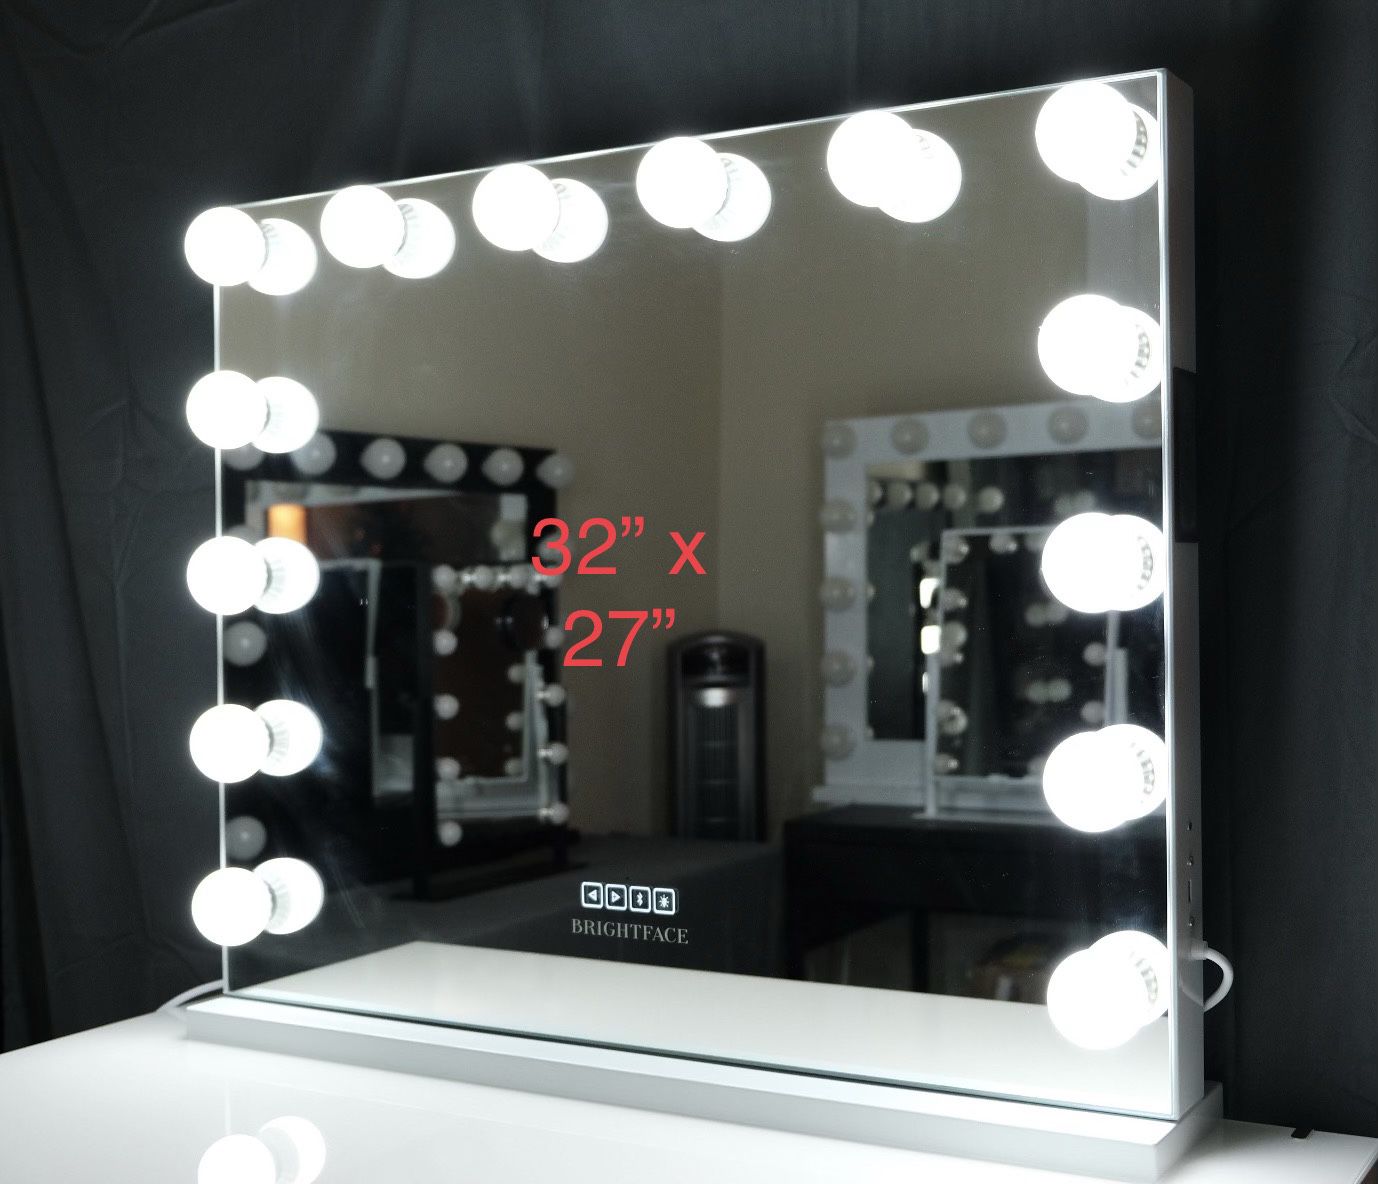 Brightface vanity mirror With Bluetooth Speaker,Touchscreen control,USB Port And Replaceable Bulbs,Frameless Color White Size 32” By 27”